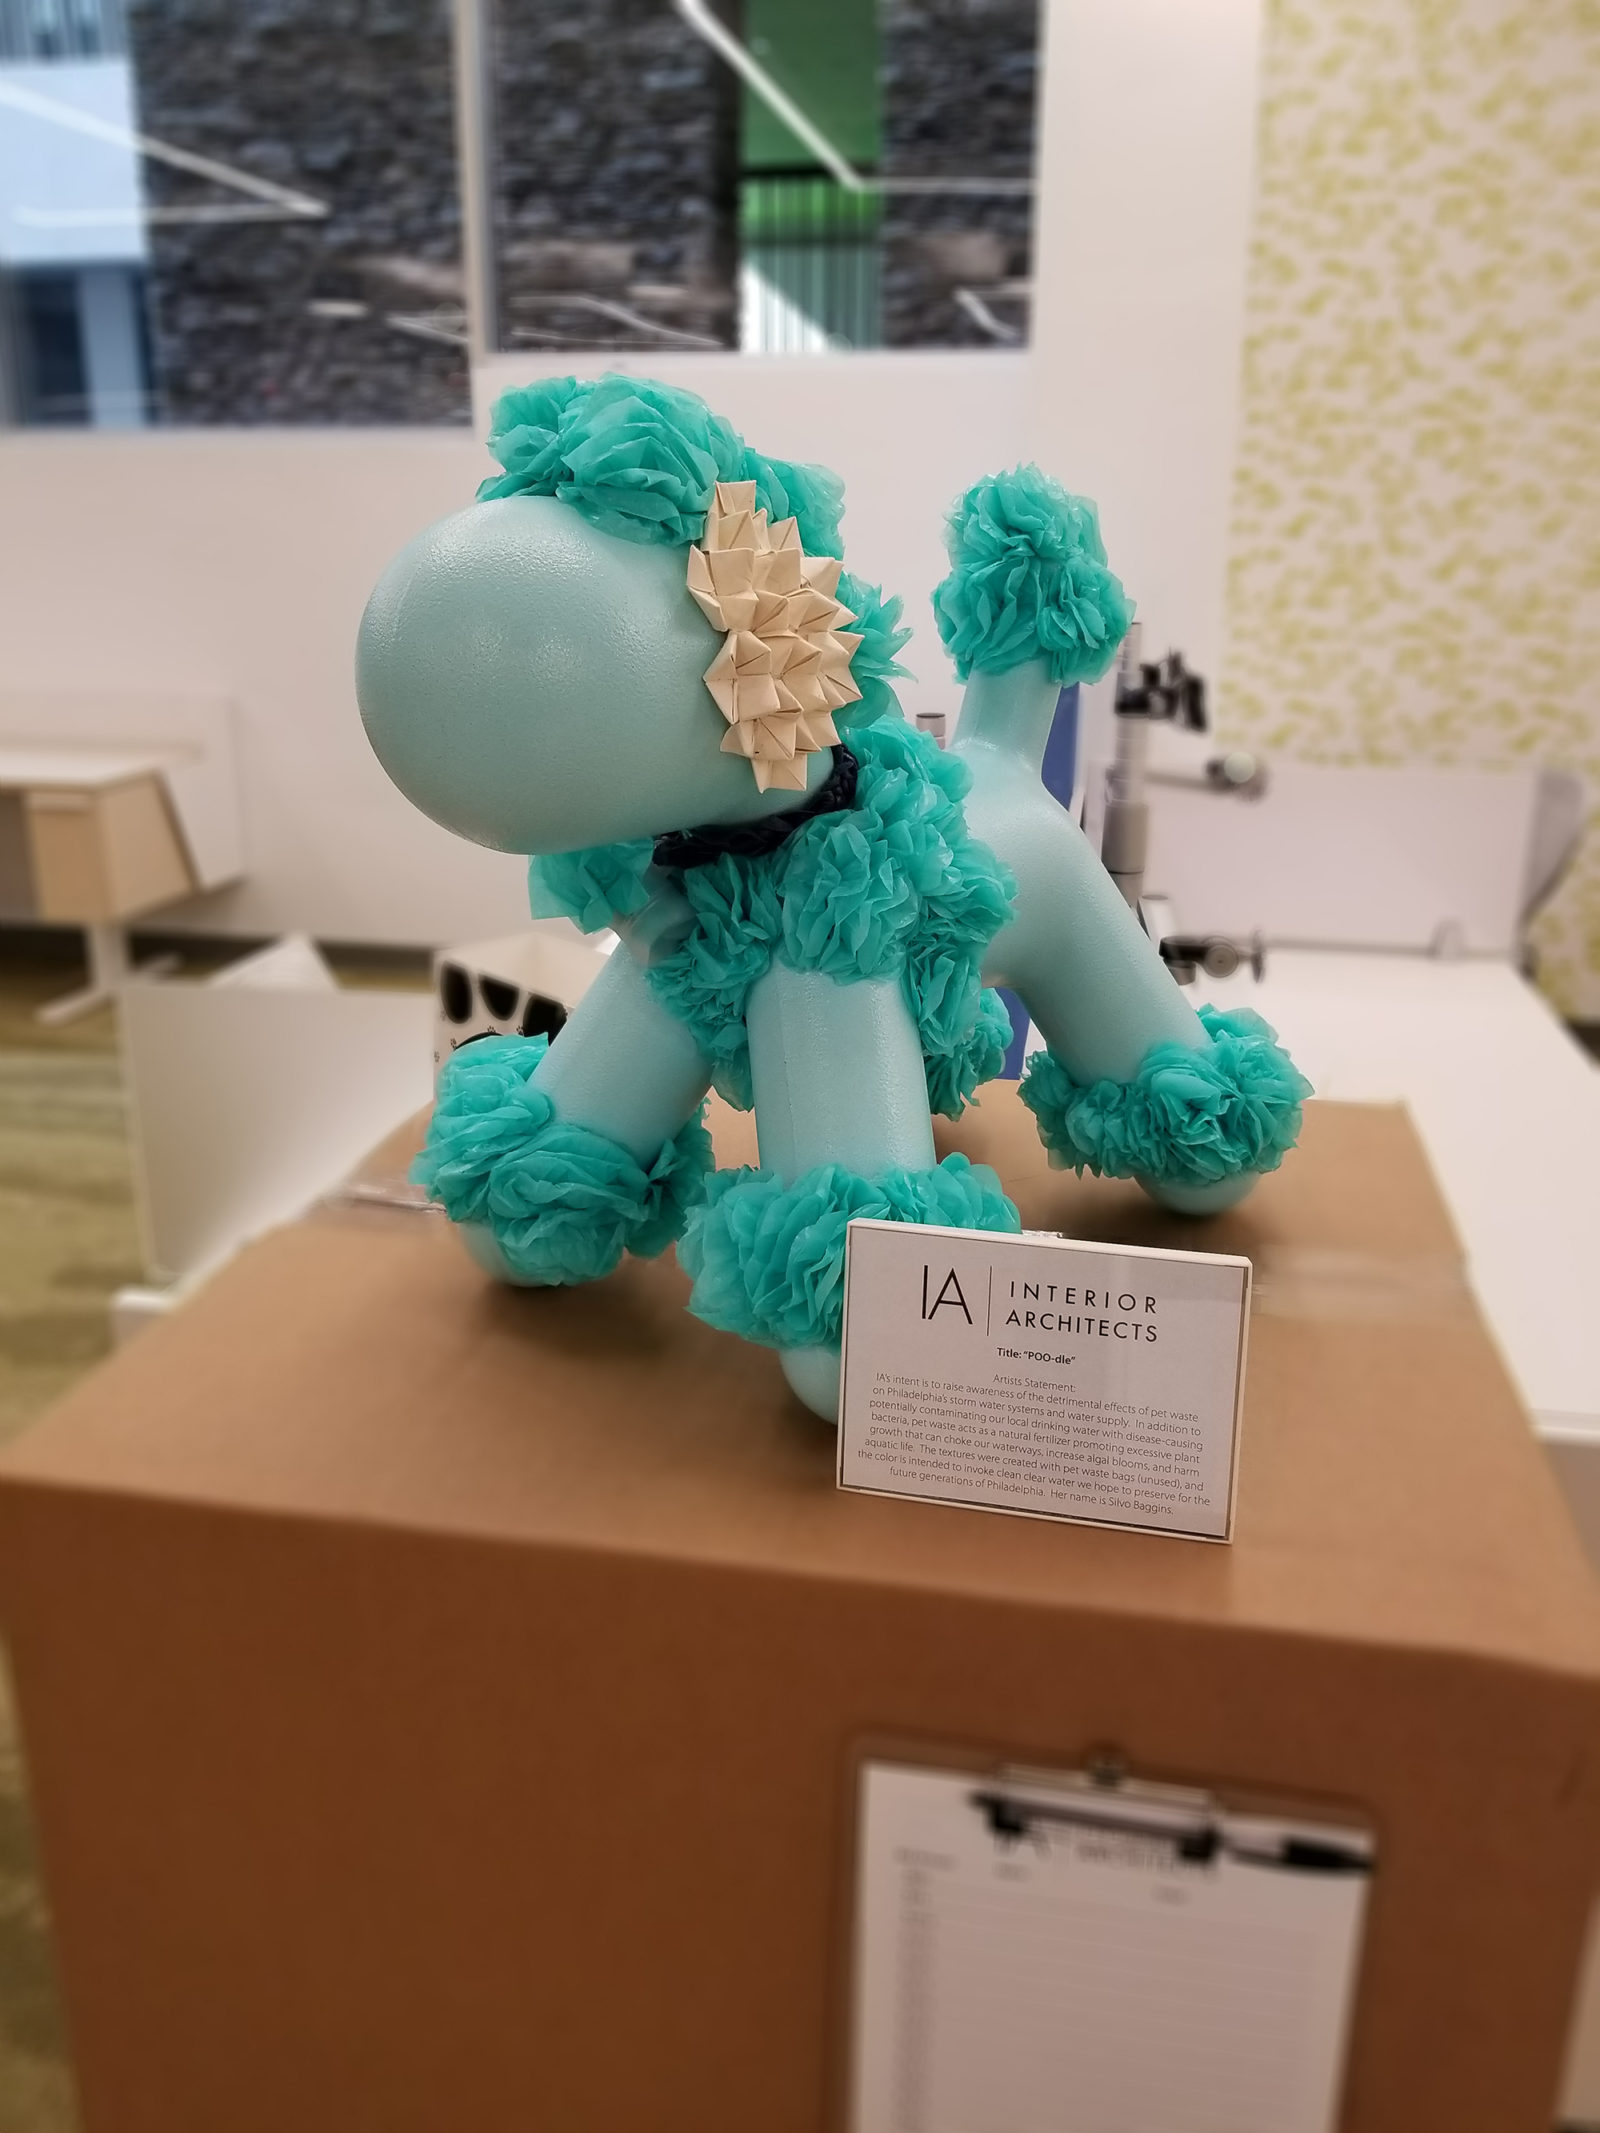 Dog statue painted a light blue/teal, then decorated with bright teal tulle around its feet, tail and on top of its head. It looks like a poodle.